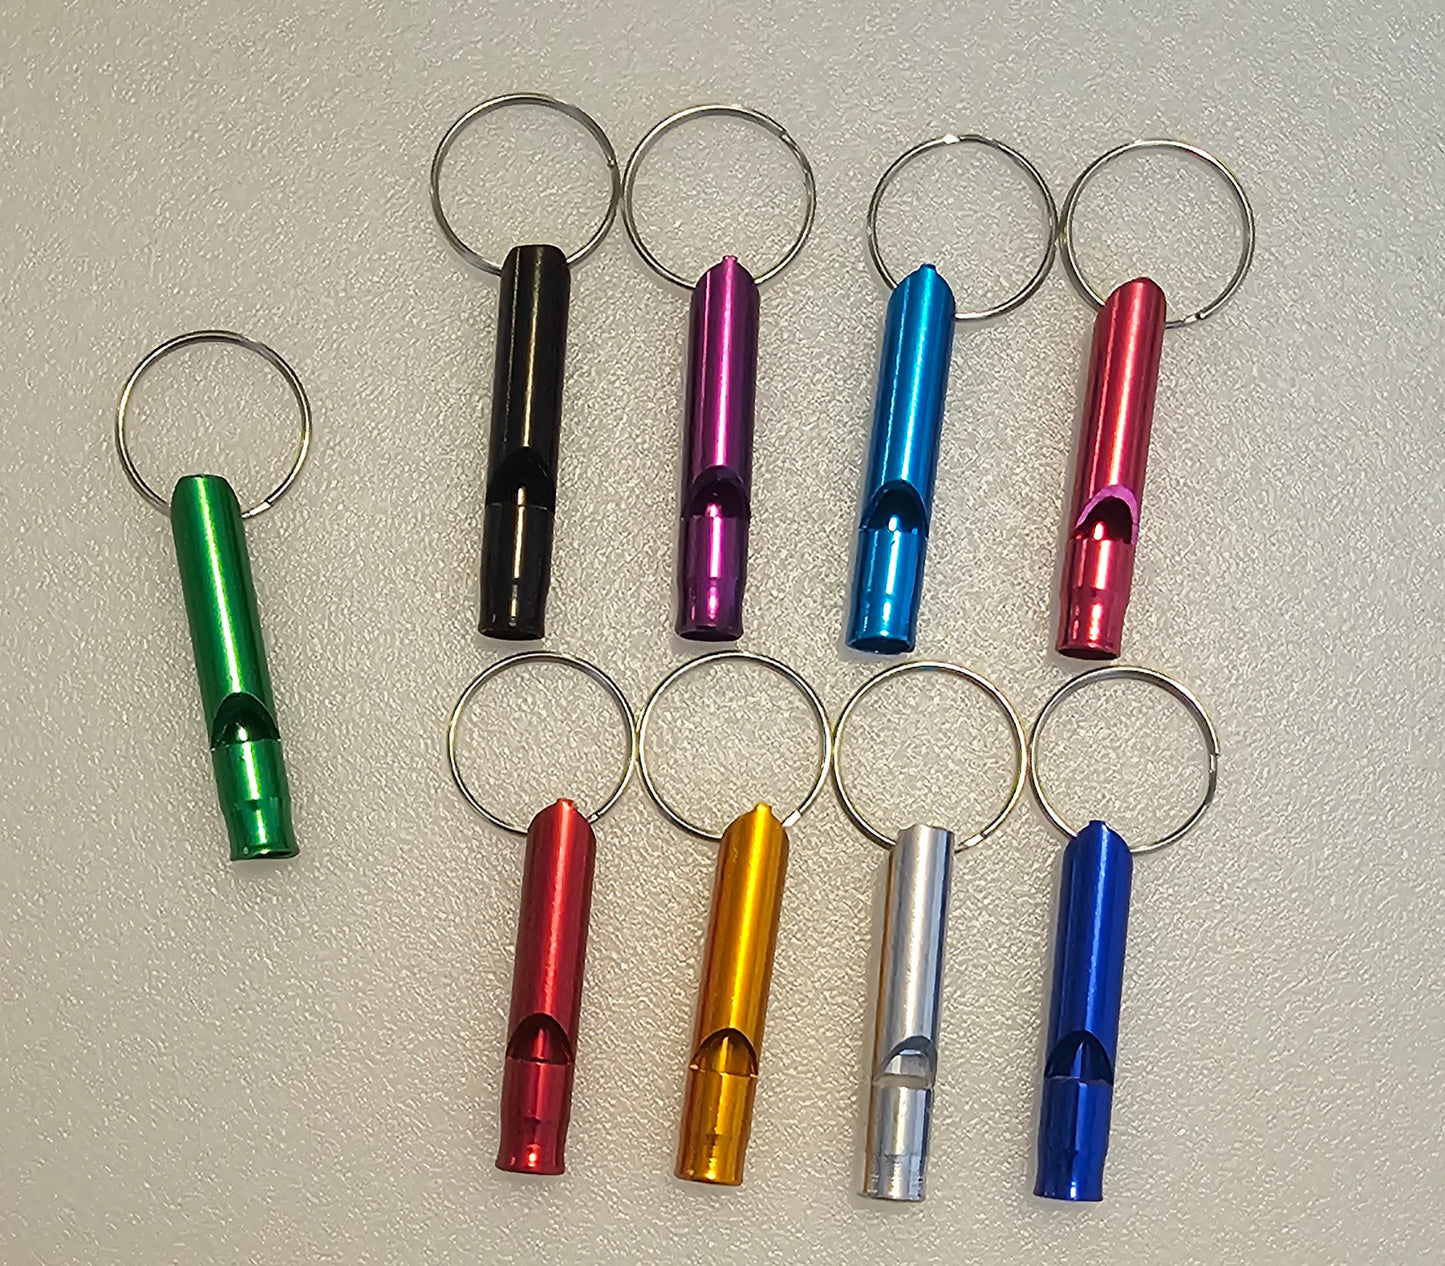 New- Safety keychain whistle